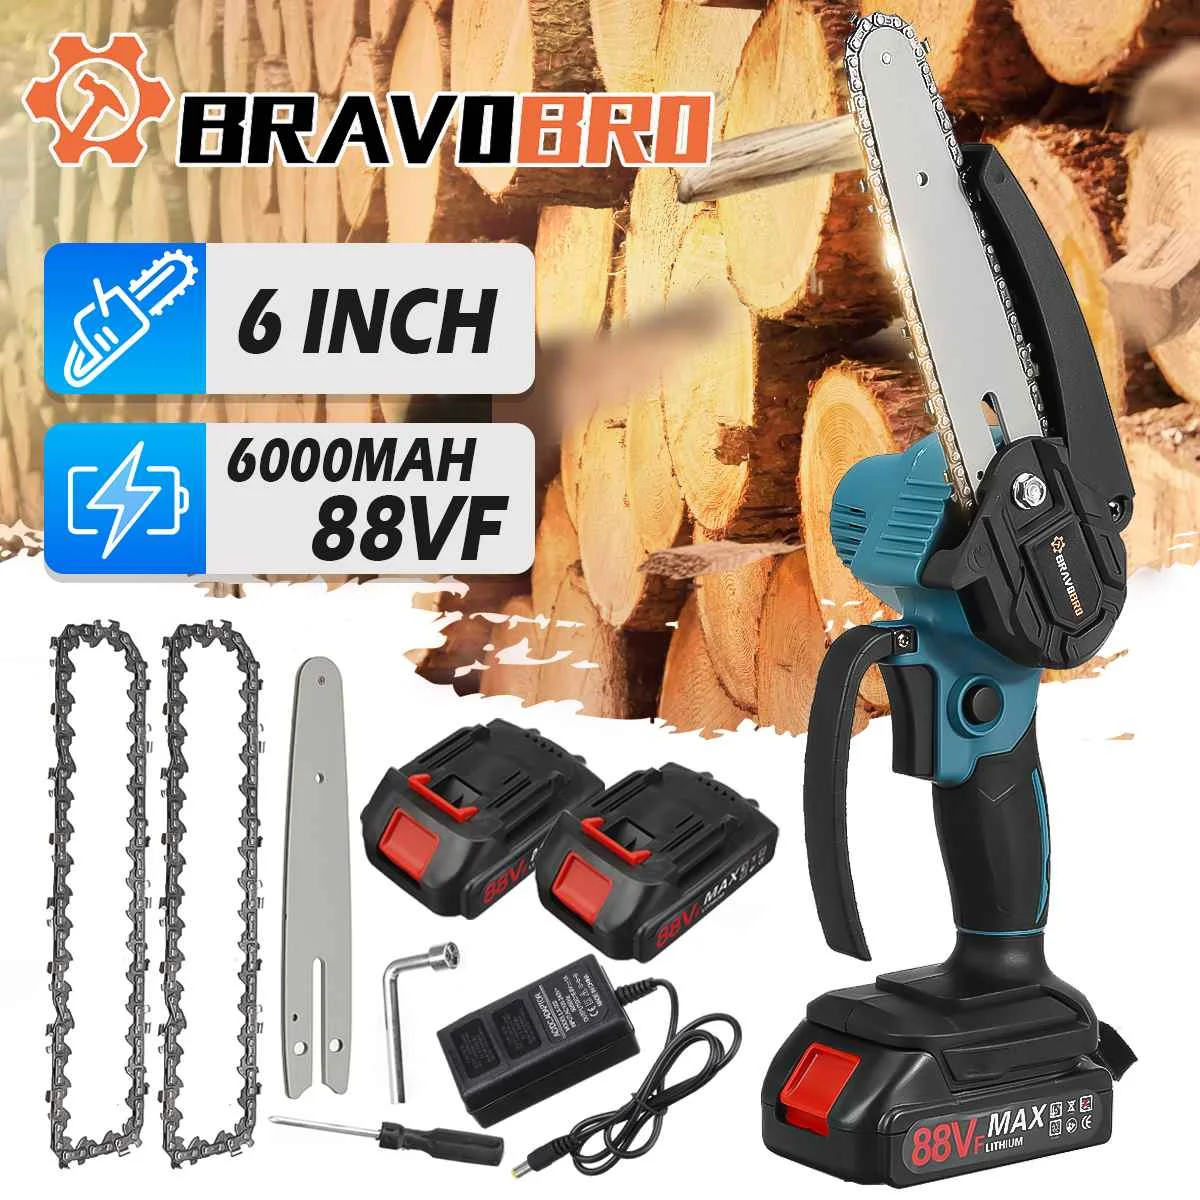 88VF 6 Inch Electric Saw Mini Chainsaw with Li-ion Battery 2pcs Chains Kit Woodworking Cutter Tool for Makita 18V by BRAVOBRO